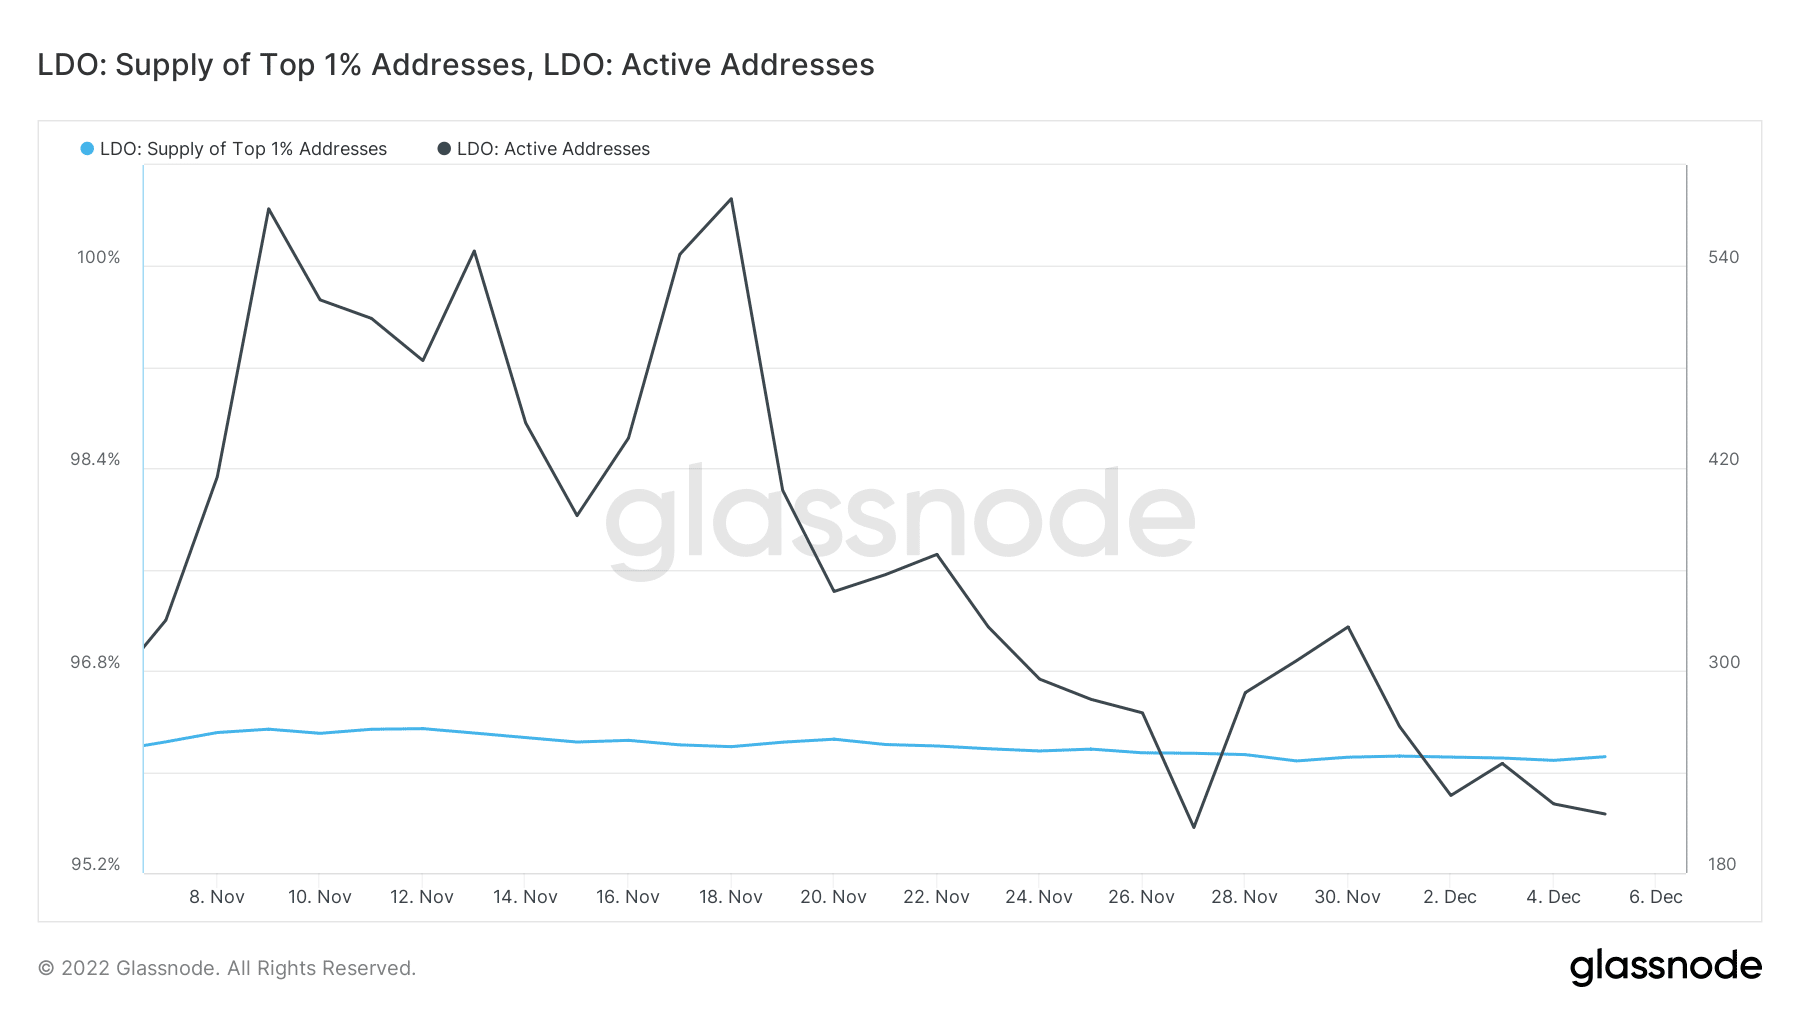 Lido active addresses and offer of top 1% addresses